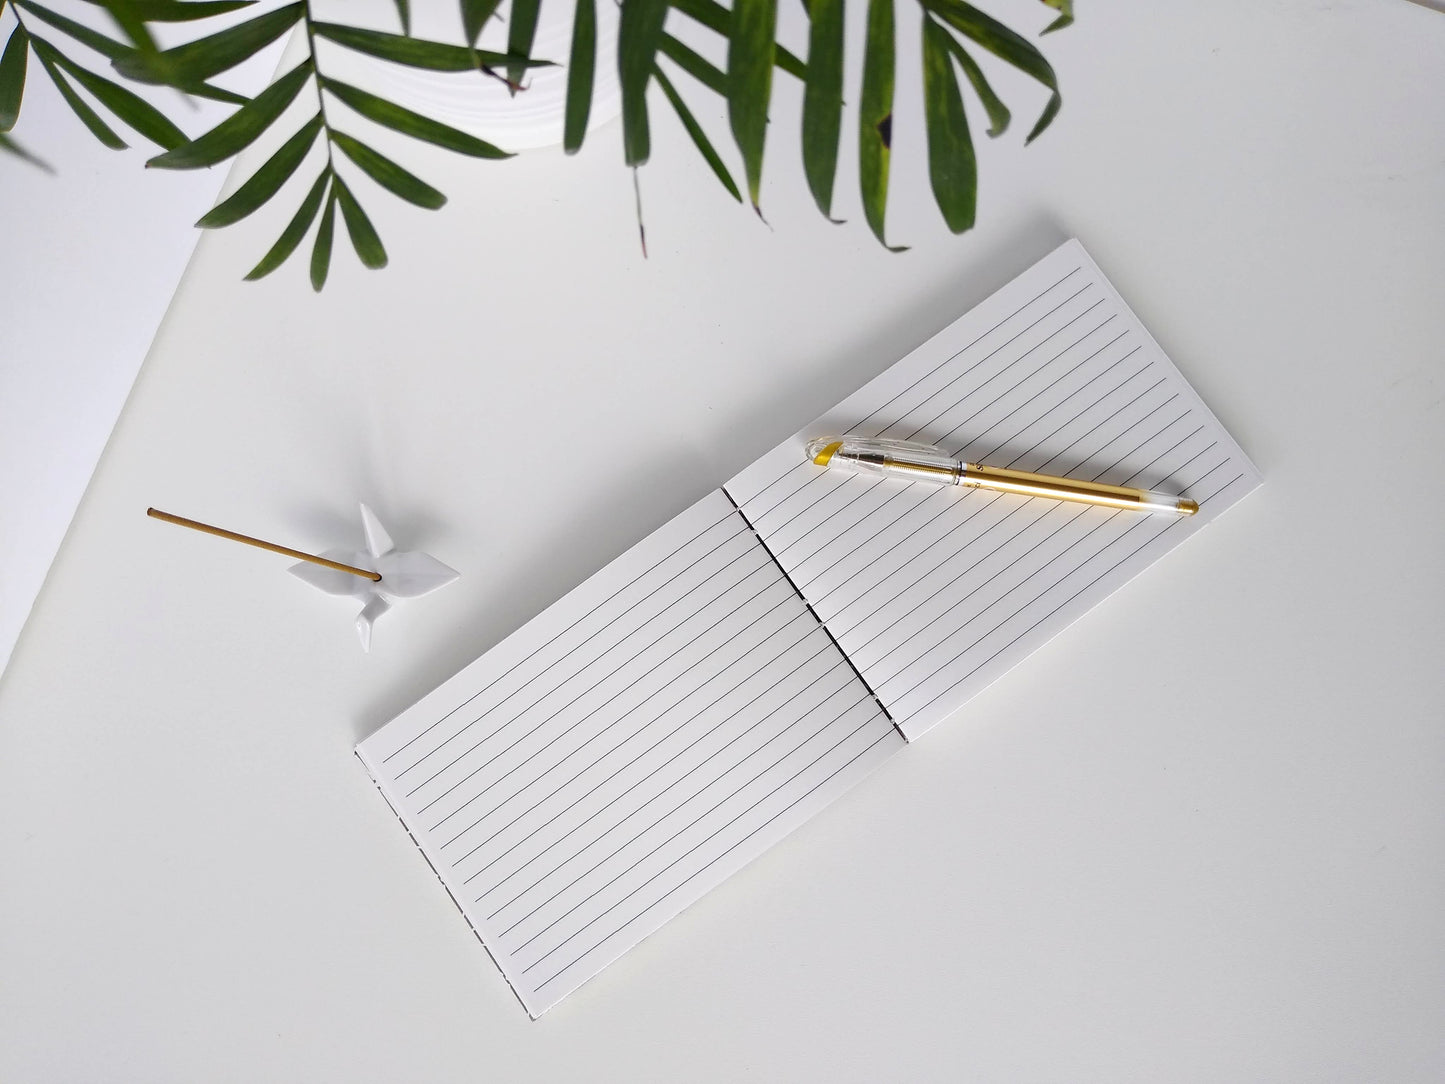 An open journal lays on a white background next to a potted plant and a ceramic crane. The journal has a grey thread connecting the pages at the spine and a gold pen rests across the lined white pages.